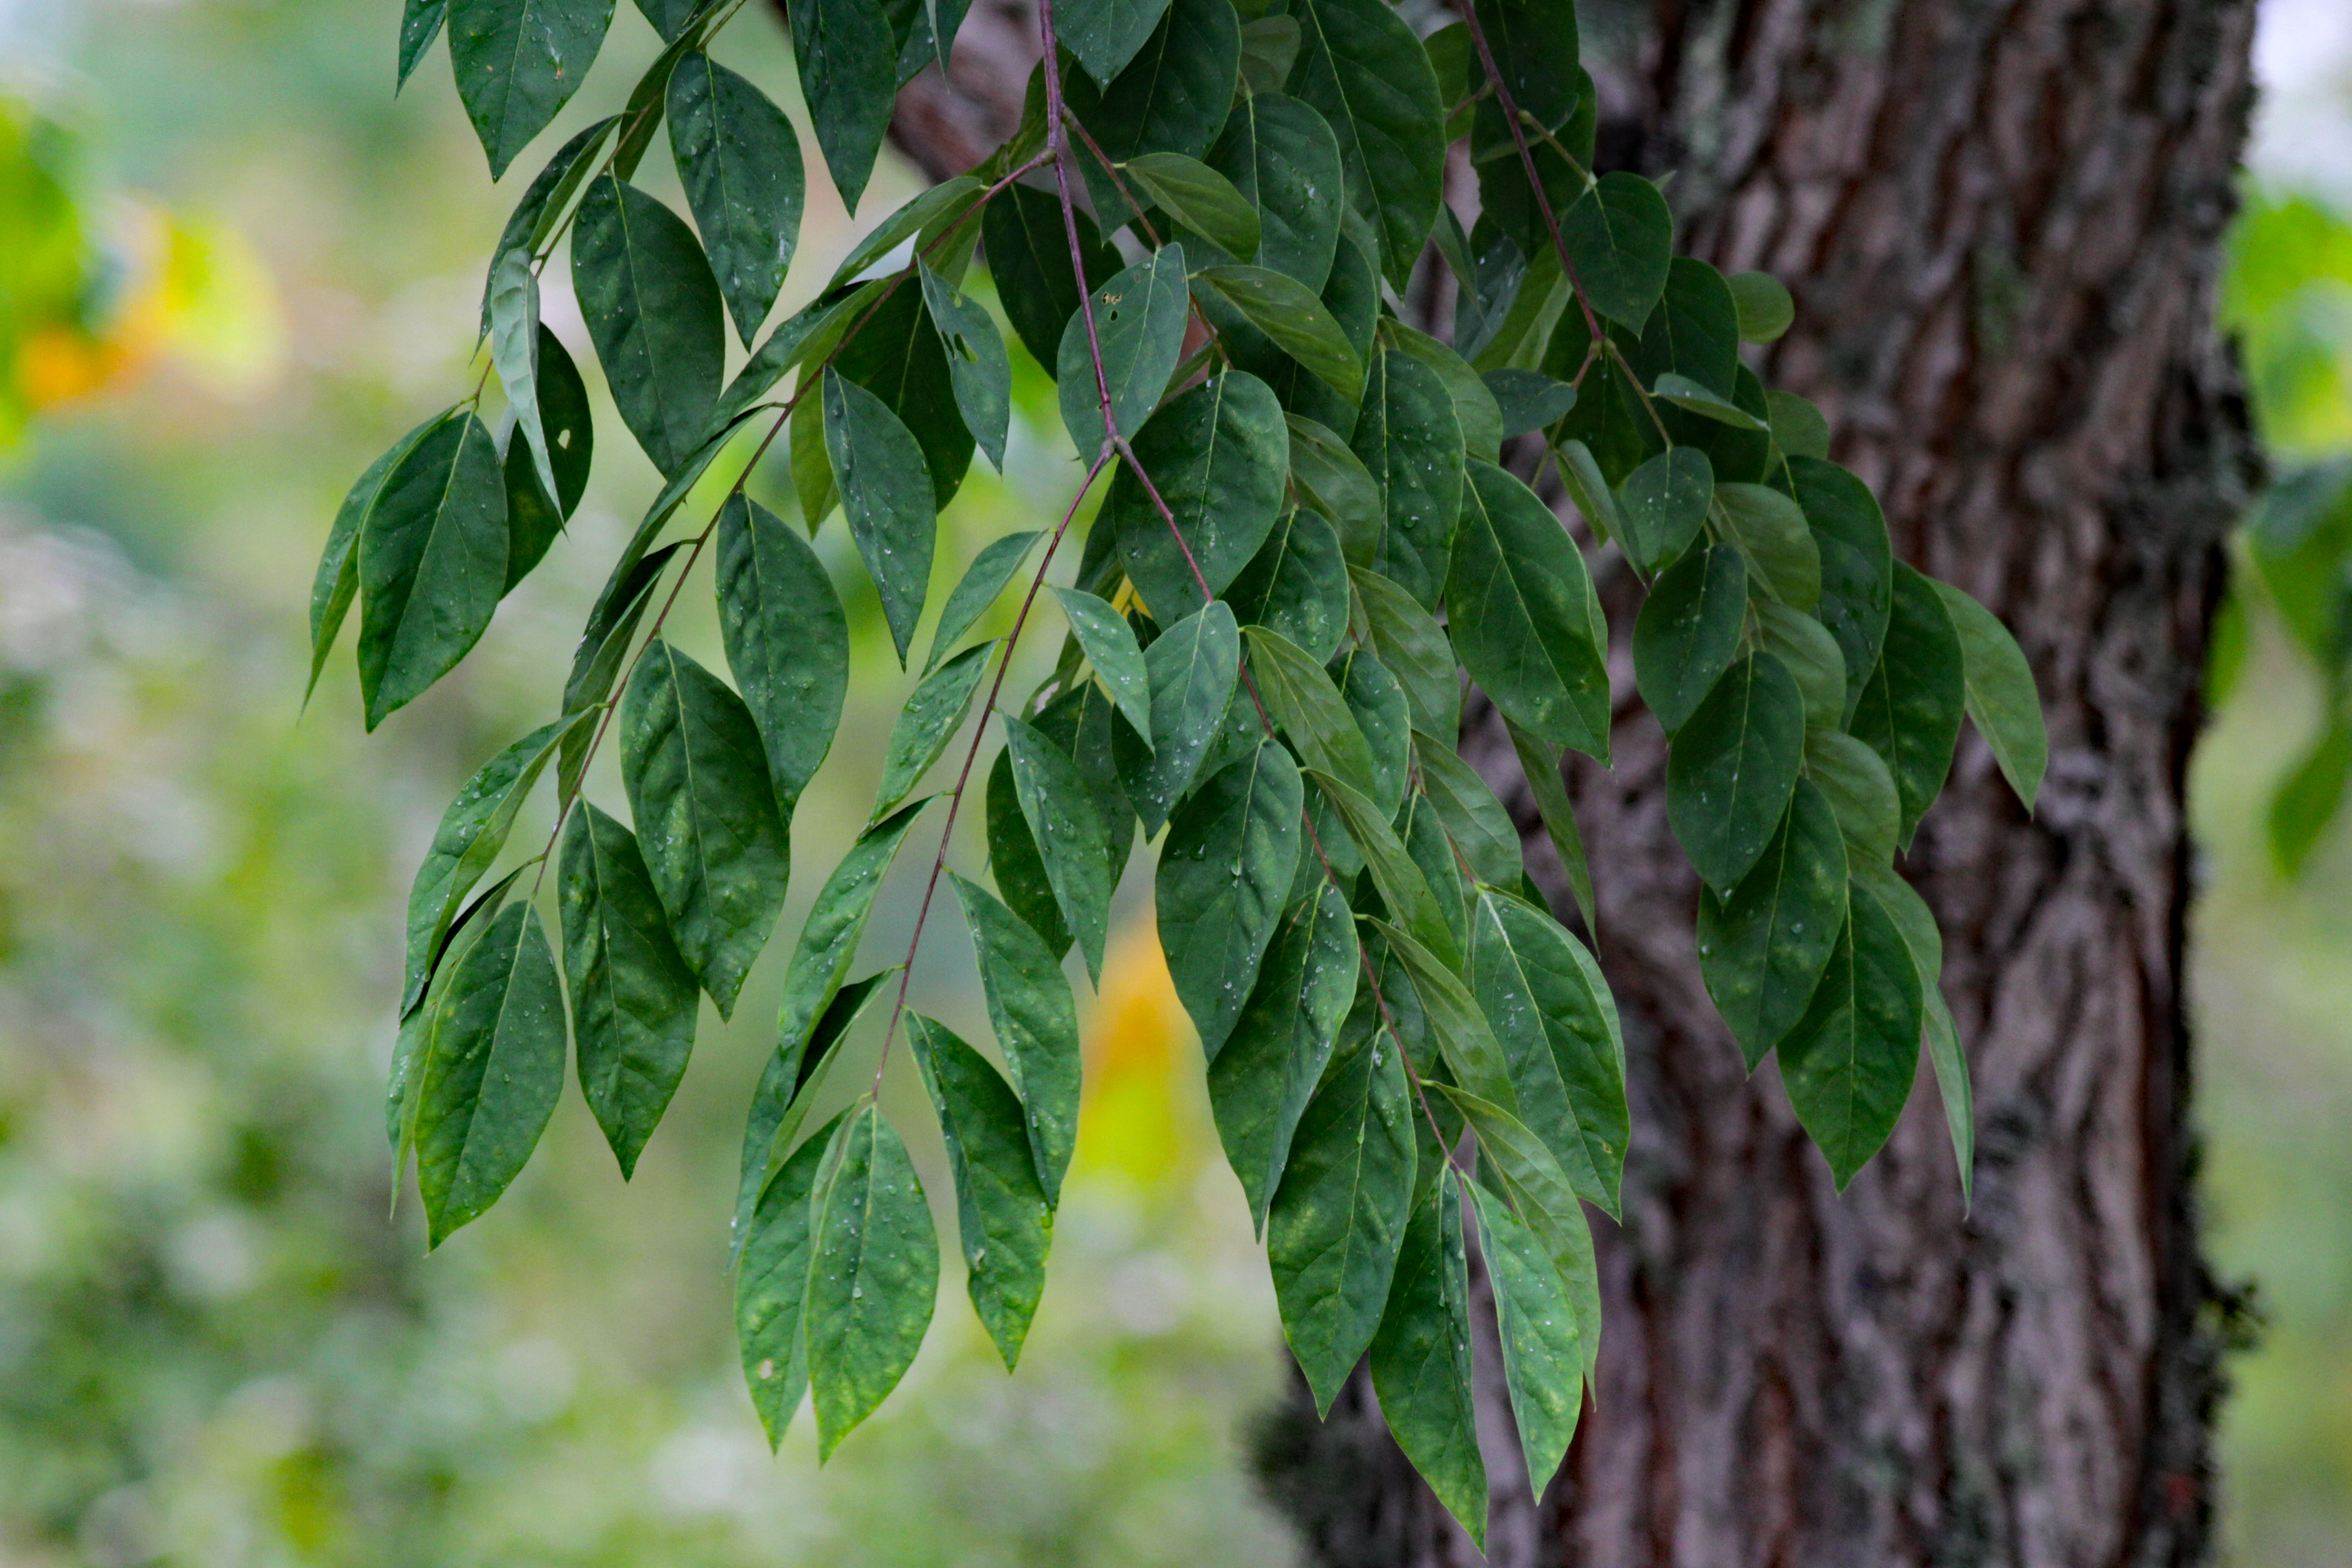 The Scientific Name is Gymnocladus dioicus. You will likely hear them called Kentucky Coffeetree, Kentucky Mahogany. This picture shows the Kentucky Coffeetrees have distinctive bipinnate compound leaves. Leaflets are ovate, glabrous, and dull green above and below. of Gymnocladus dioicus